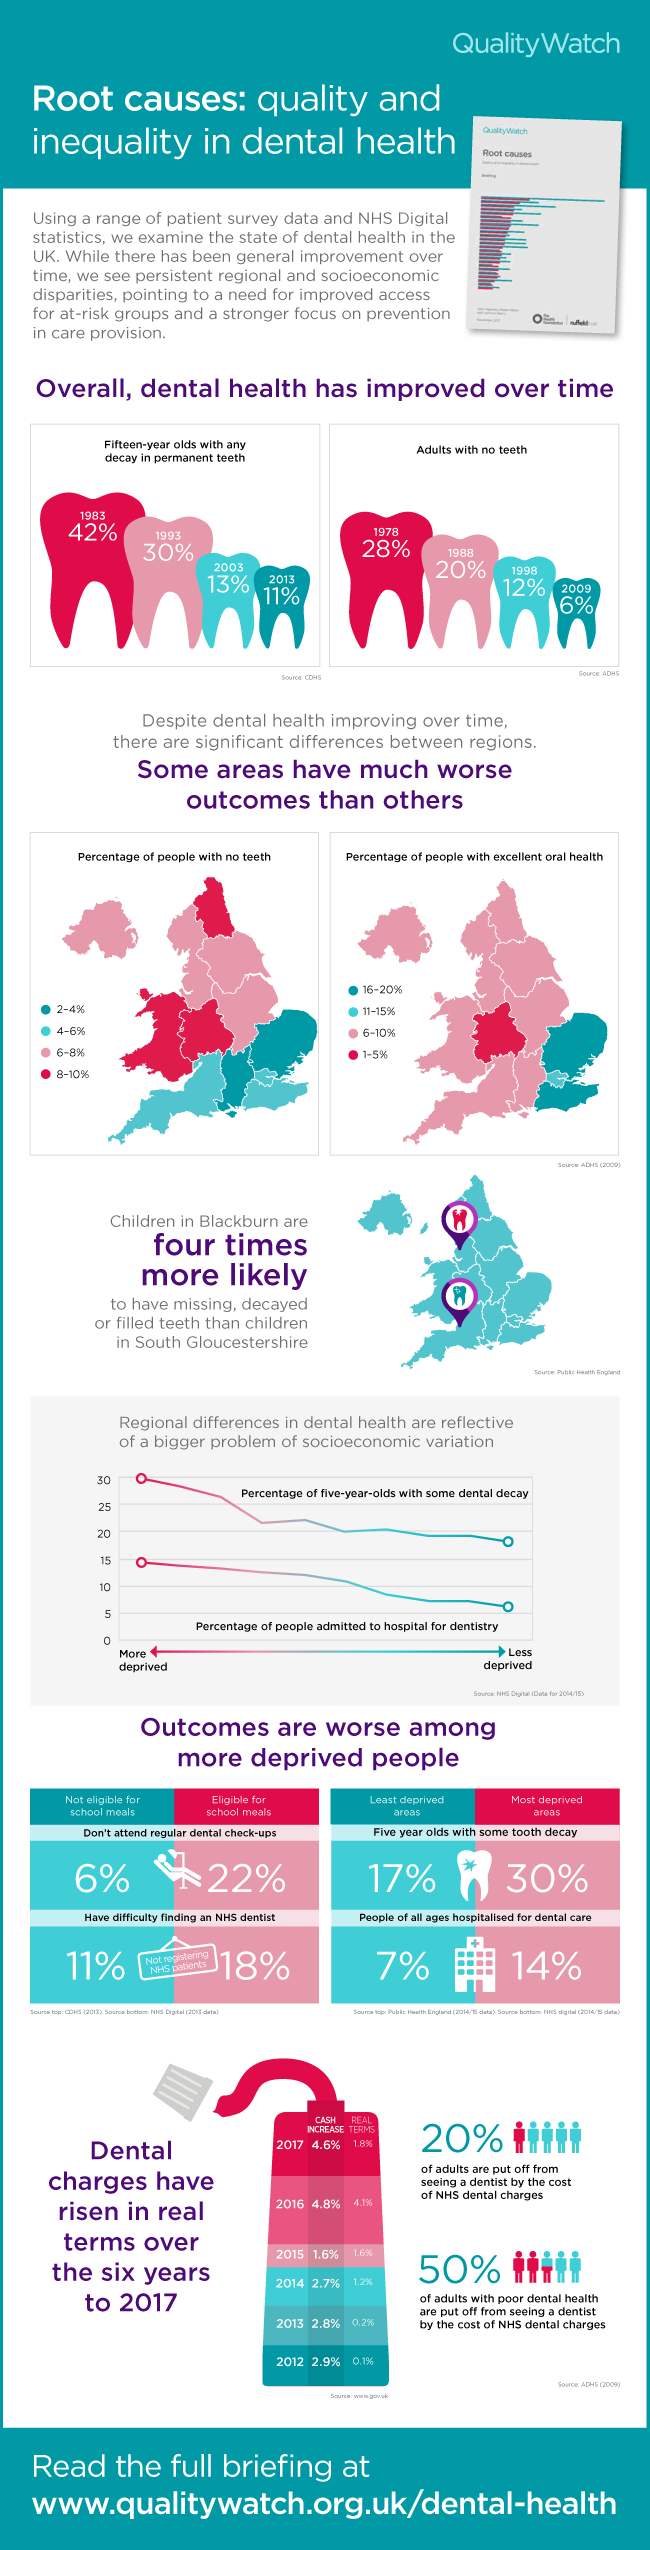 There are persistent regional and socioeconomic disparities in dental care in the UK, and a need for improved access for at-risk groups and a stronger focus on prevention. 